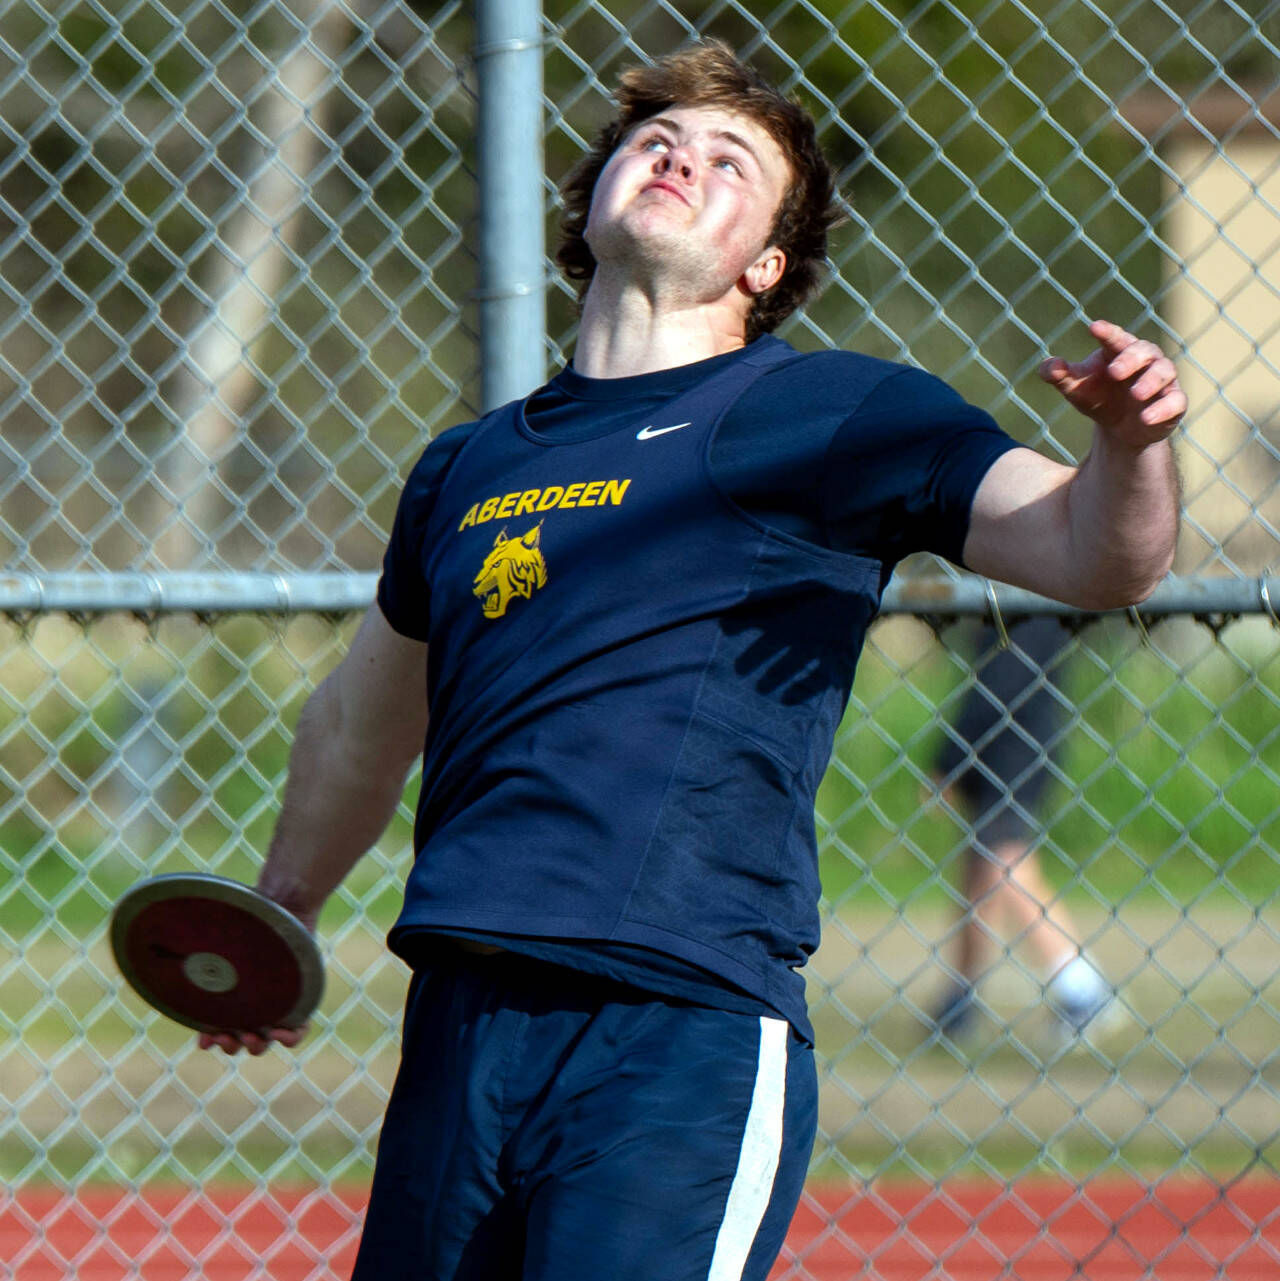 PHOTO BY FOREST WORGUM Aberdeen junior Tyler Bates, seen here in a file photo, won the district championship in the discus for the second-consecutive season at the 2A District 4 Championships on Friday at Columbia River High School.